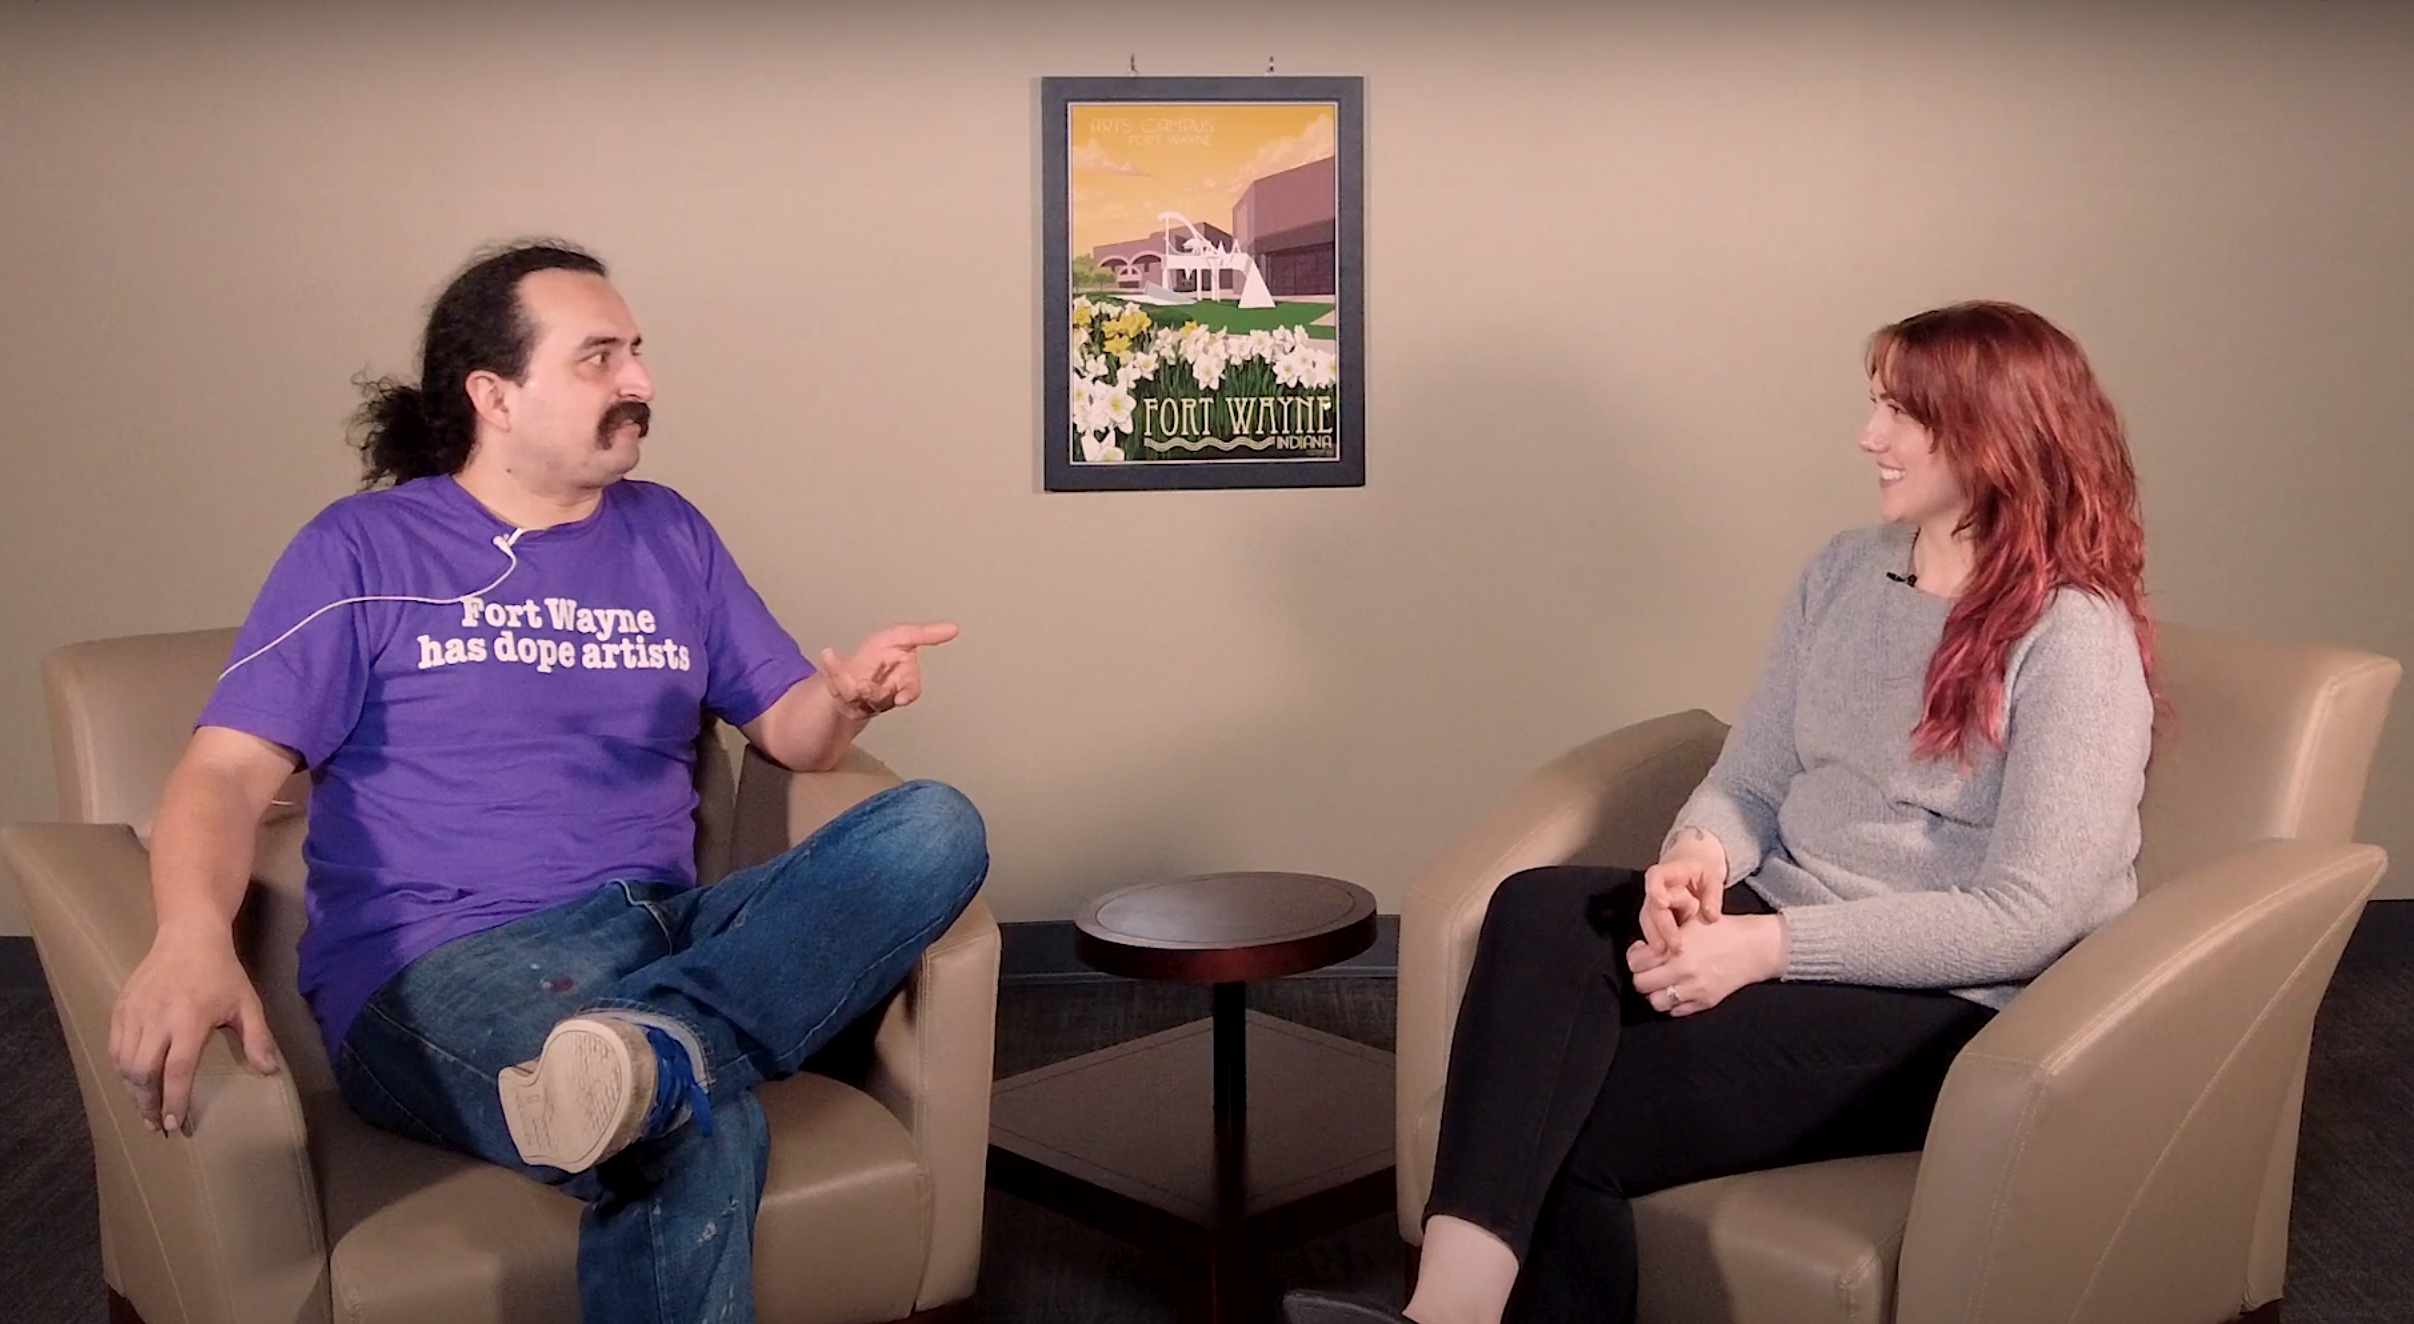 Rachelle Reinking, Director of Communications for Arts United, chats with Francisco Reyes, a local artist, about Fort Wayne Open Walls and Wrecklords events.